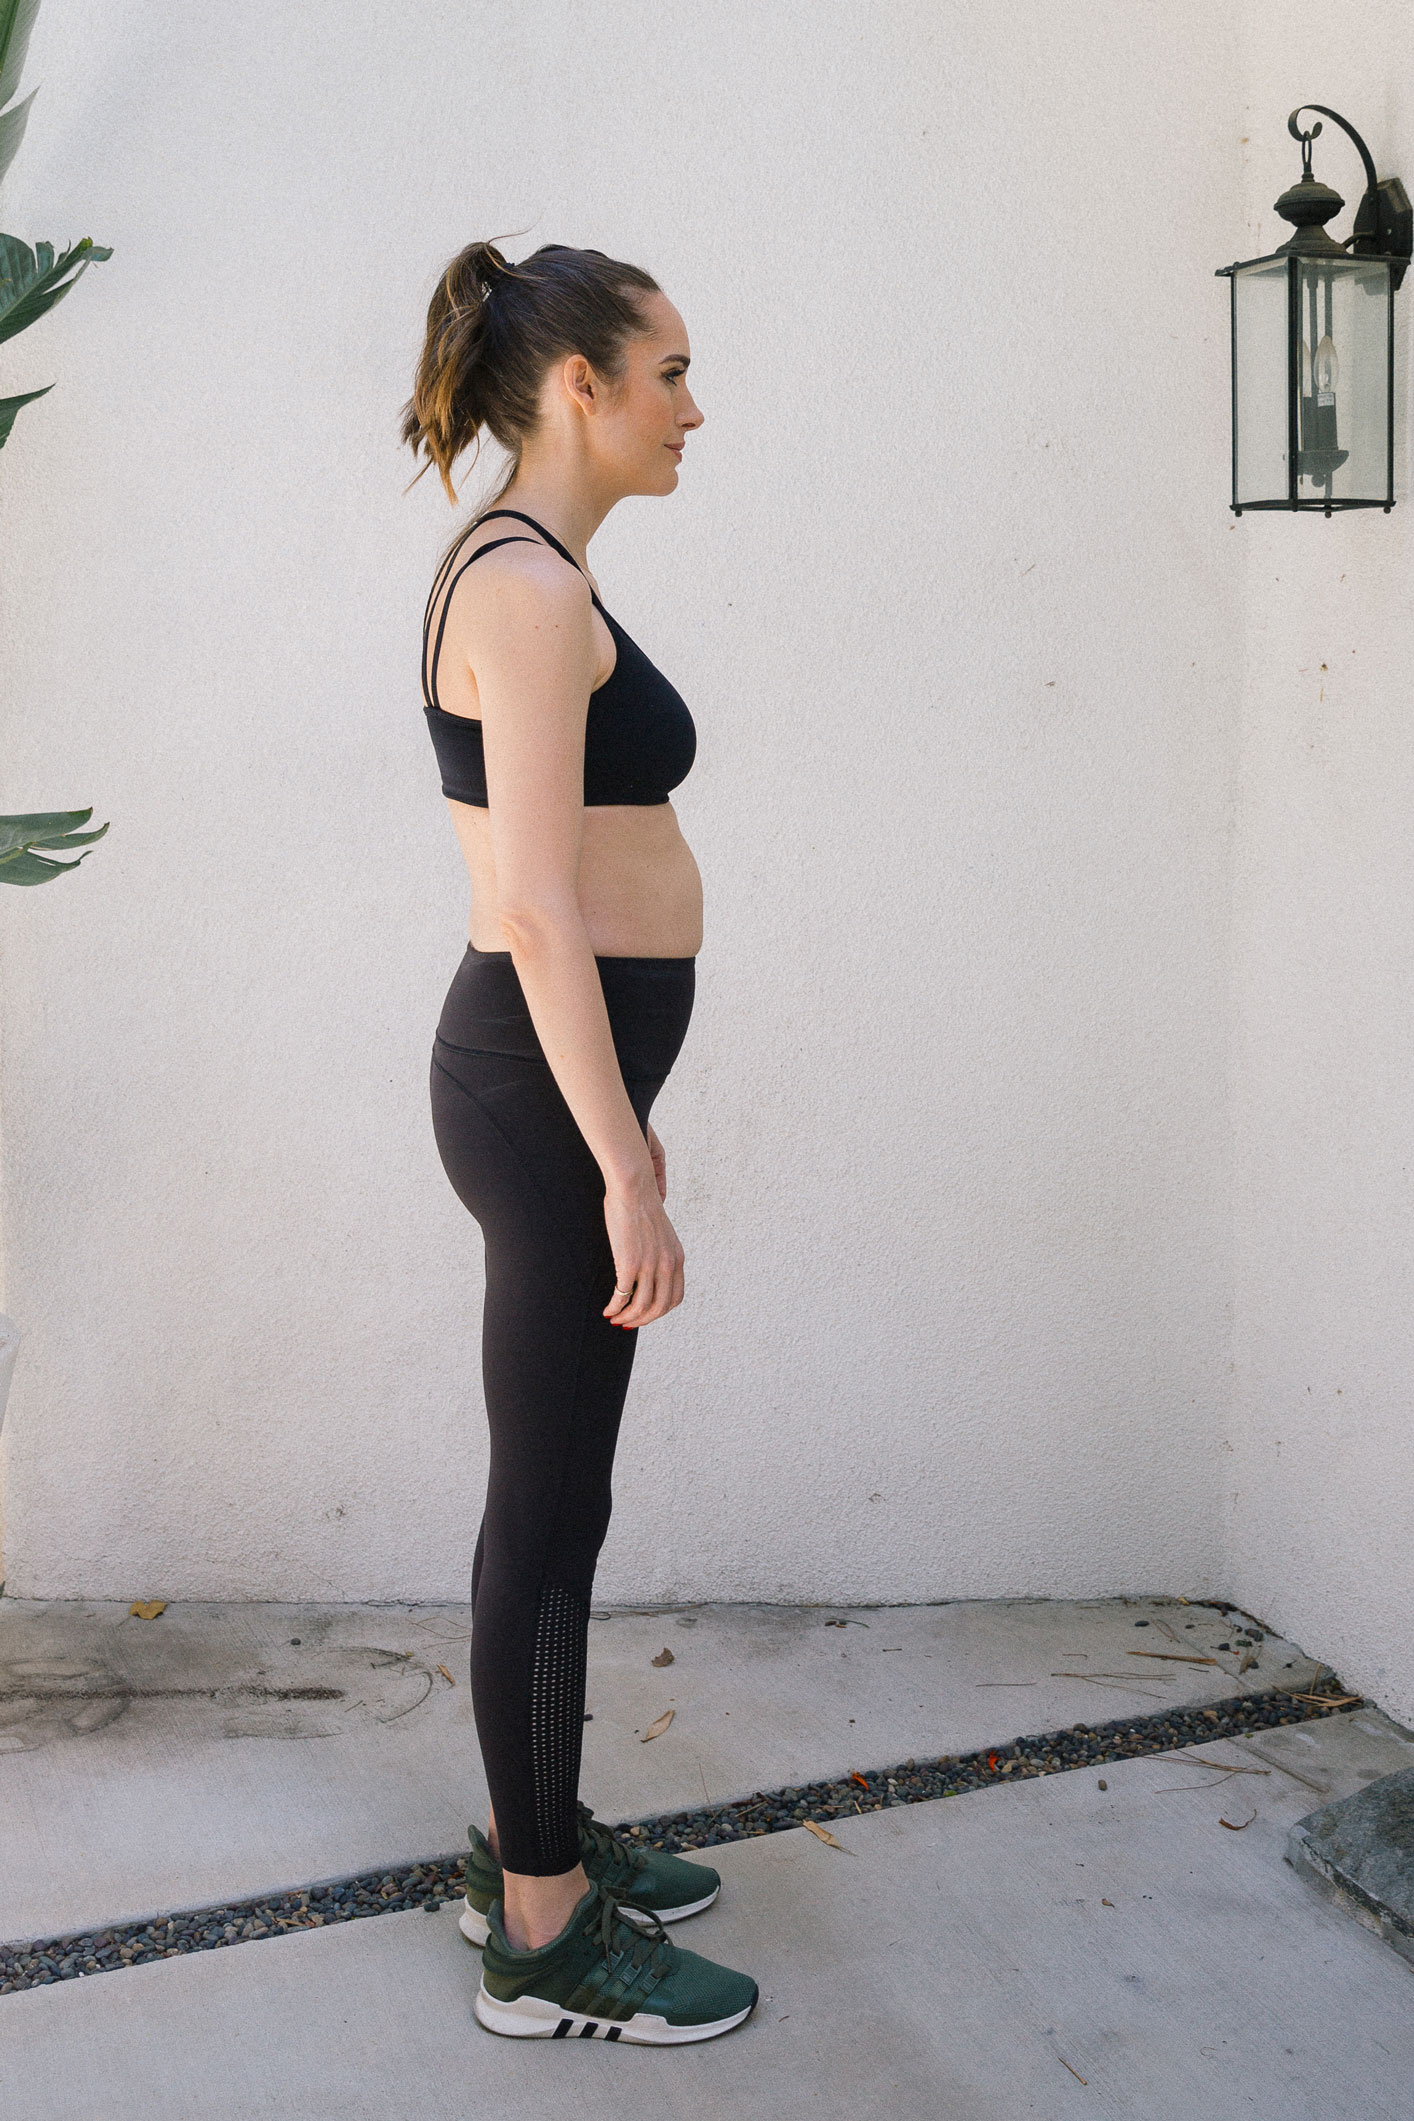 Louise Roe Fitness Tips For Getting Back In Shape After Pregnancy